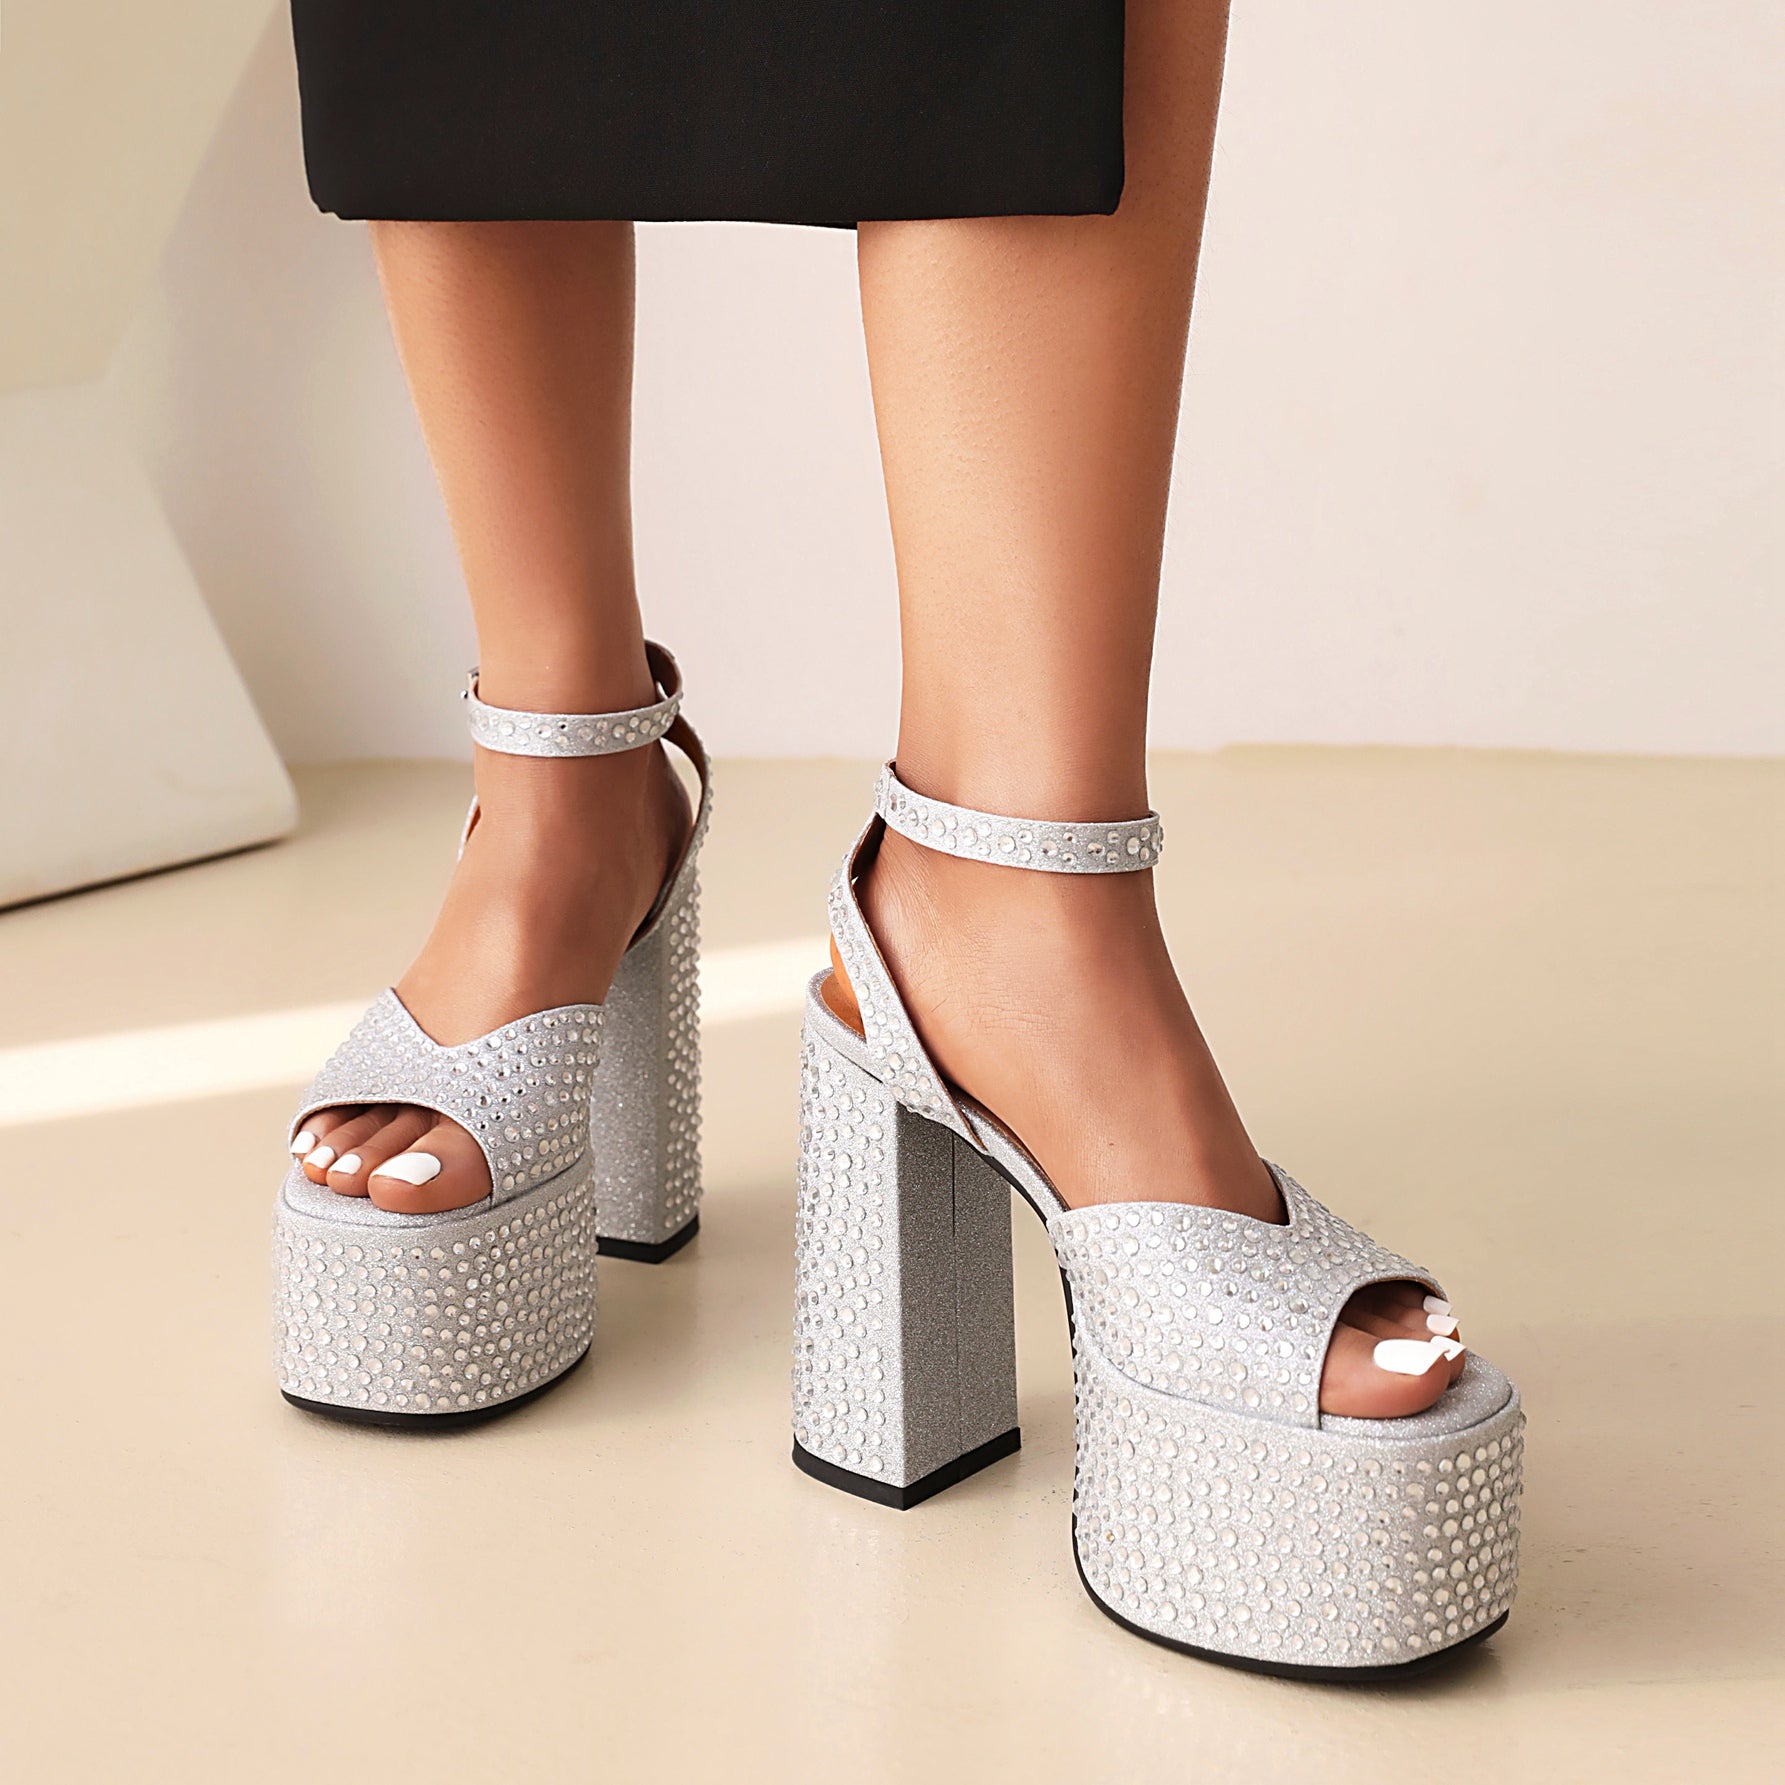 the Sexy Ankle Strap Chunky Heel Platform Sandals-Silver best platfrom sandals are from bigsizeheels